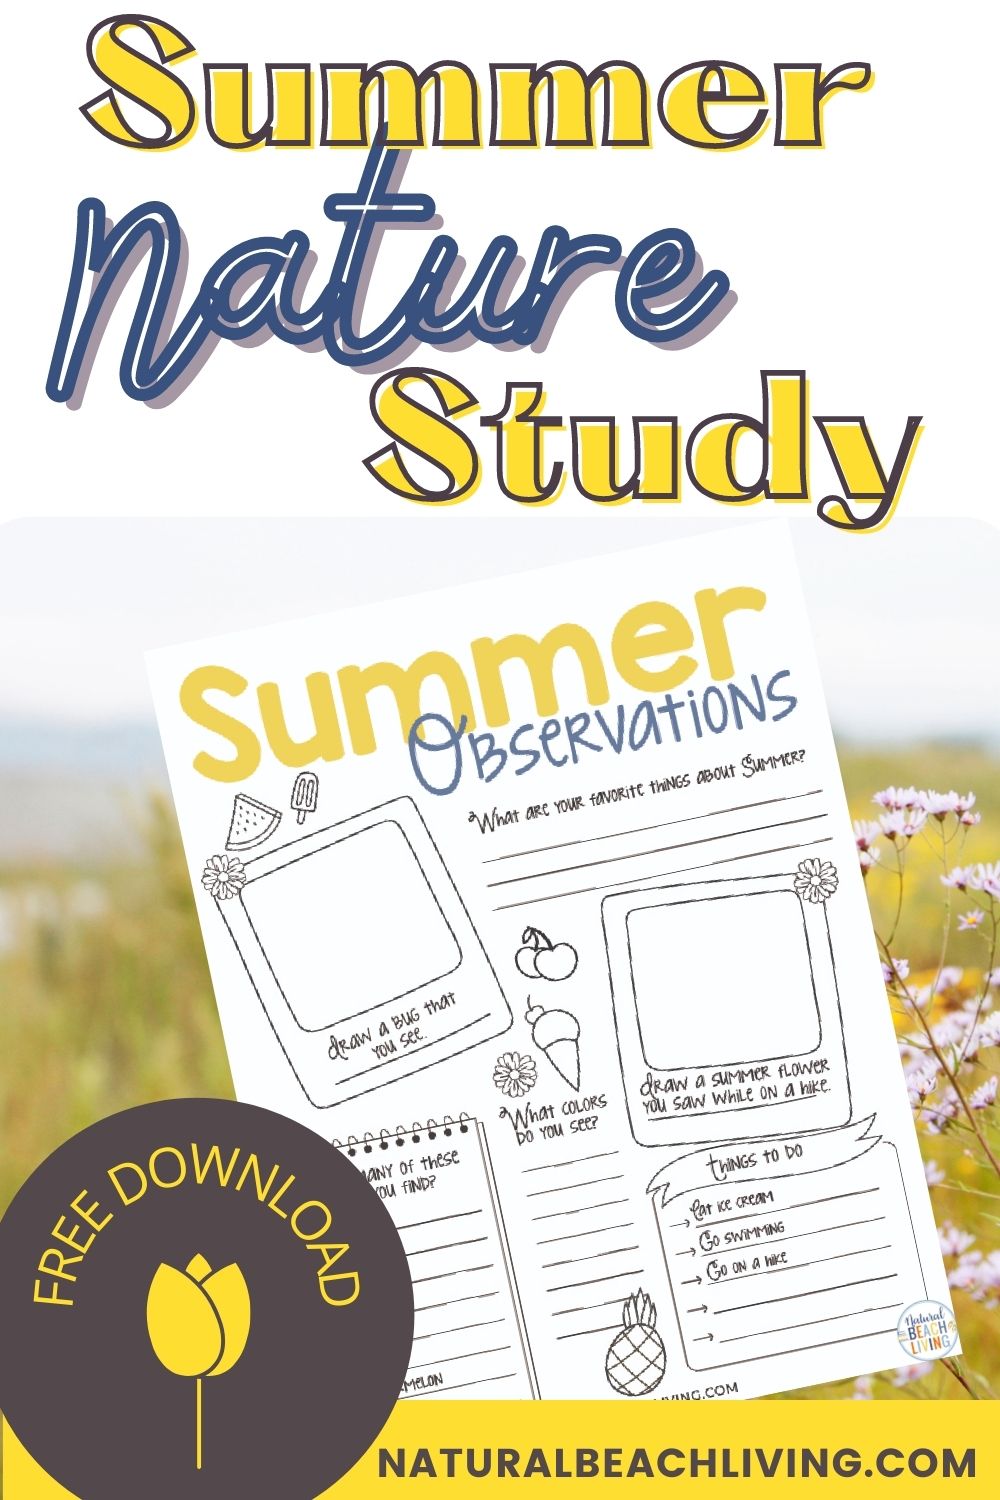 Summer Nature Study for Kids